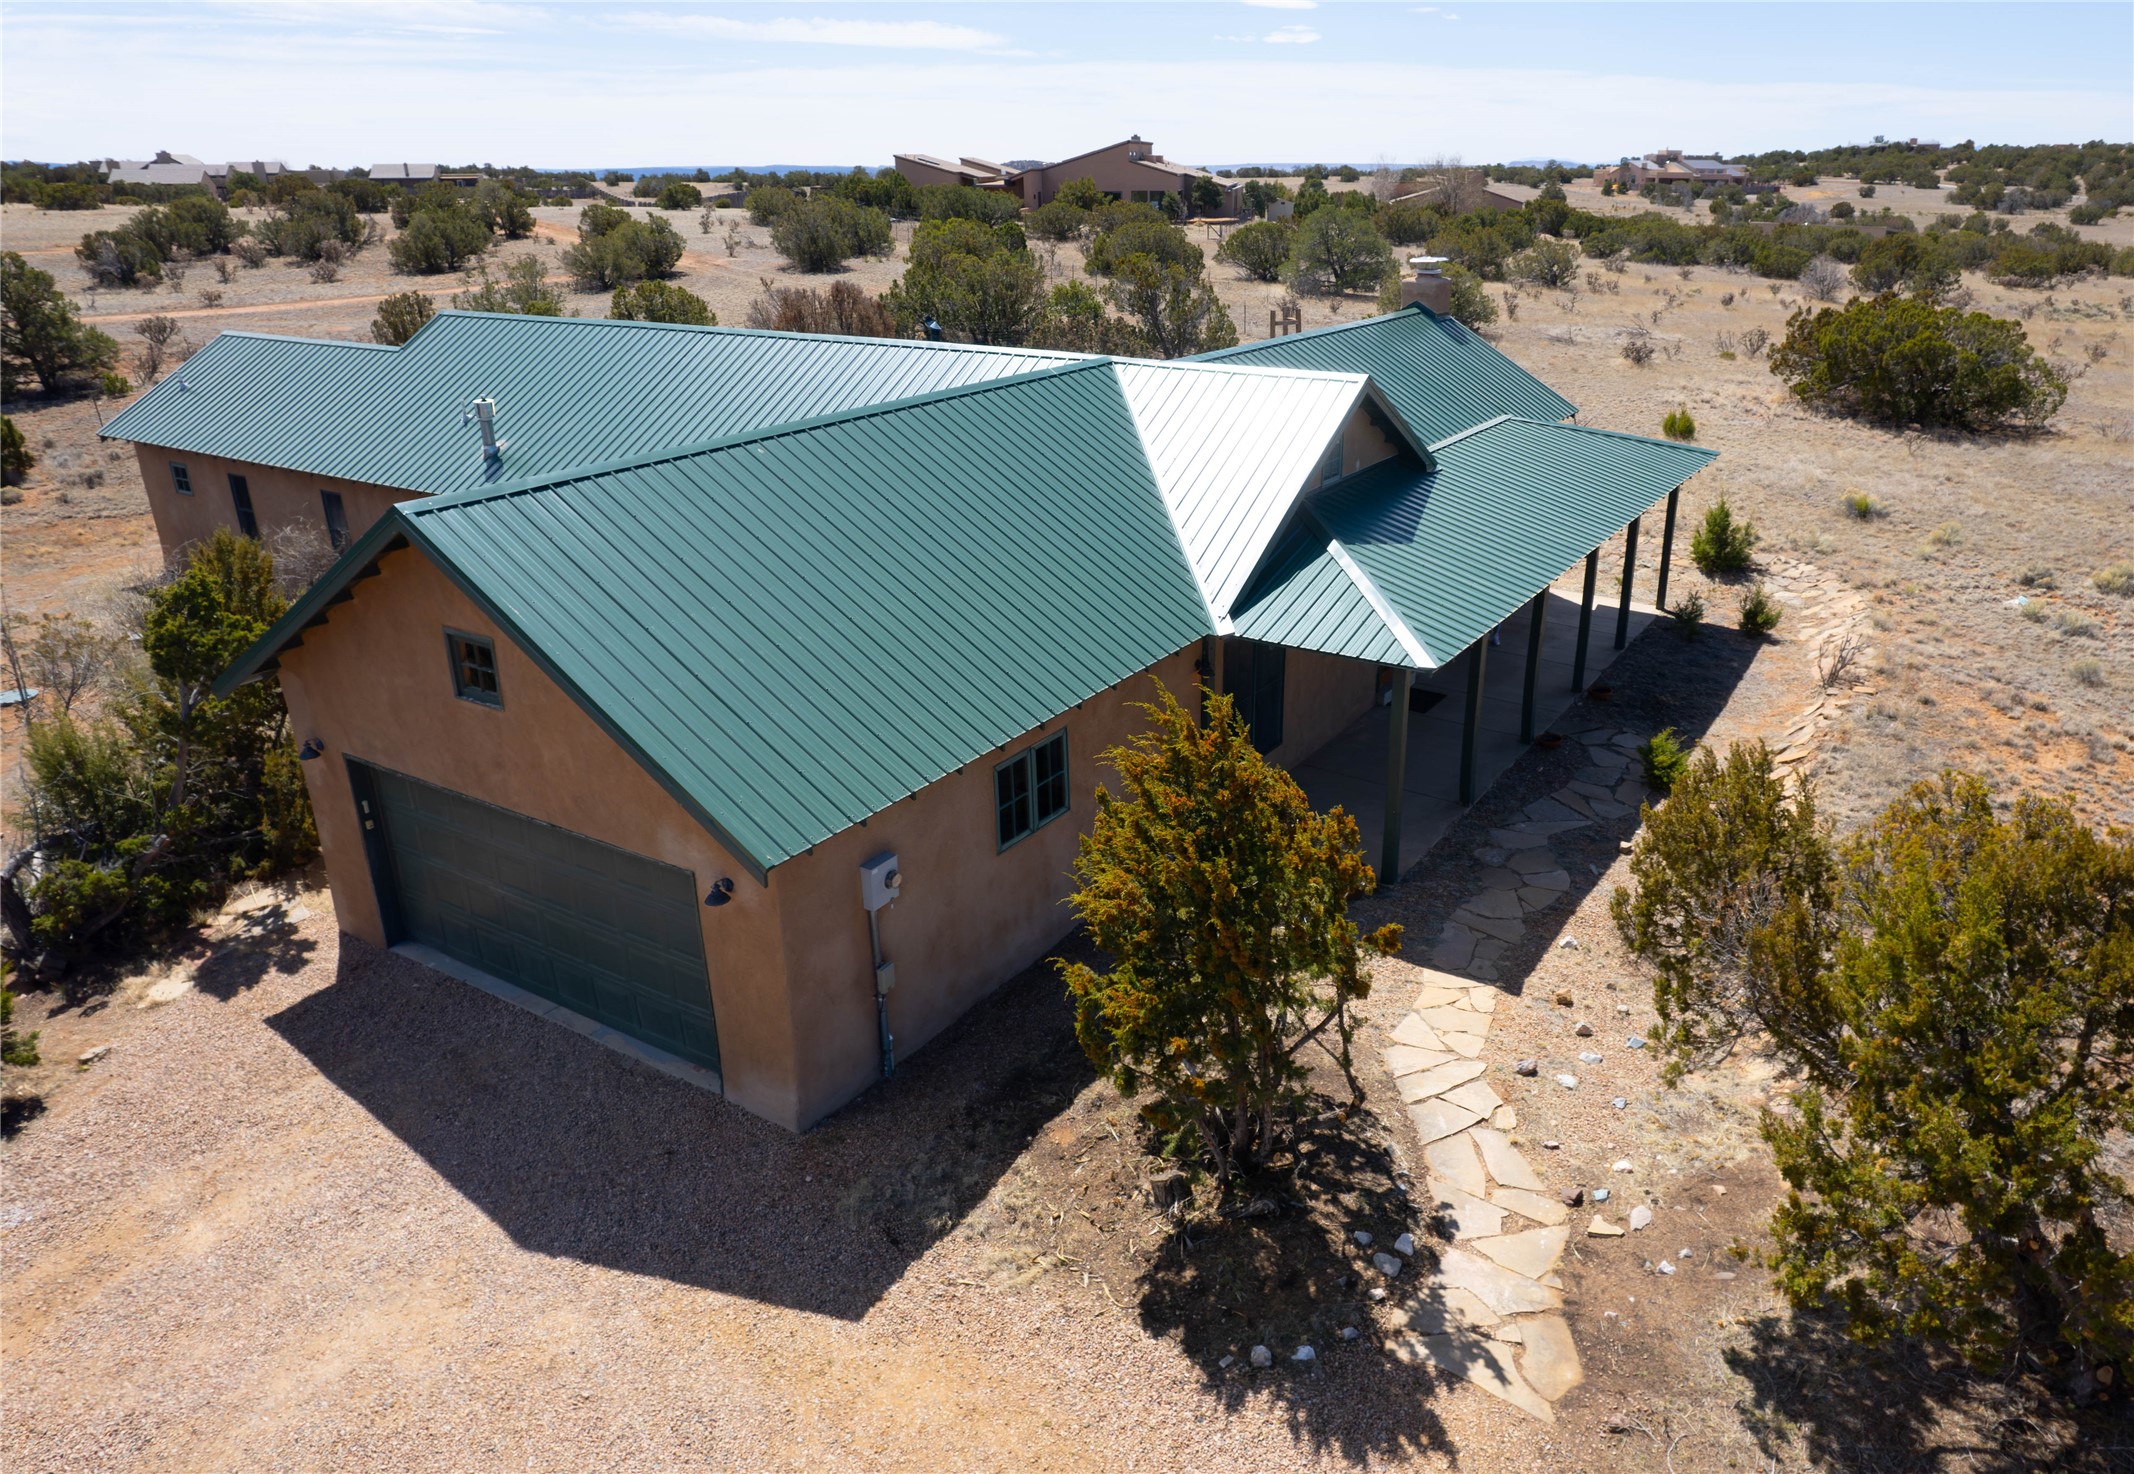 33 Willa Cather Road, Lamy, New Mexico 87508, 2 Bedrooms Bedrooms, ,2 BathroomsBathrooms,Residential,For Sale,33 Willa Cather Road,202341909